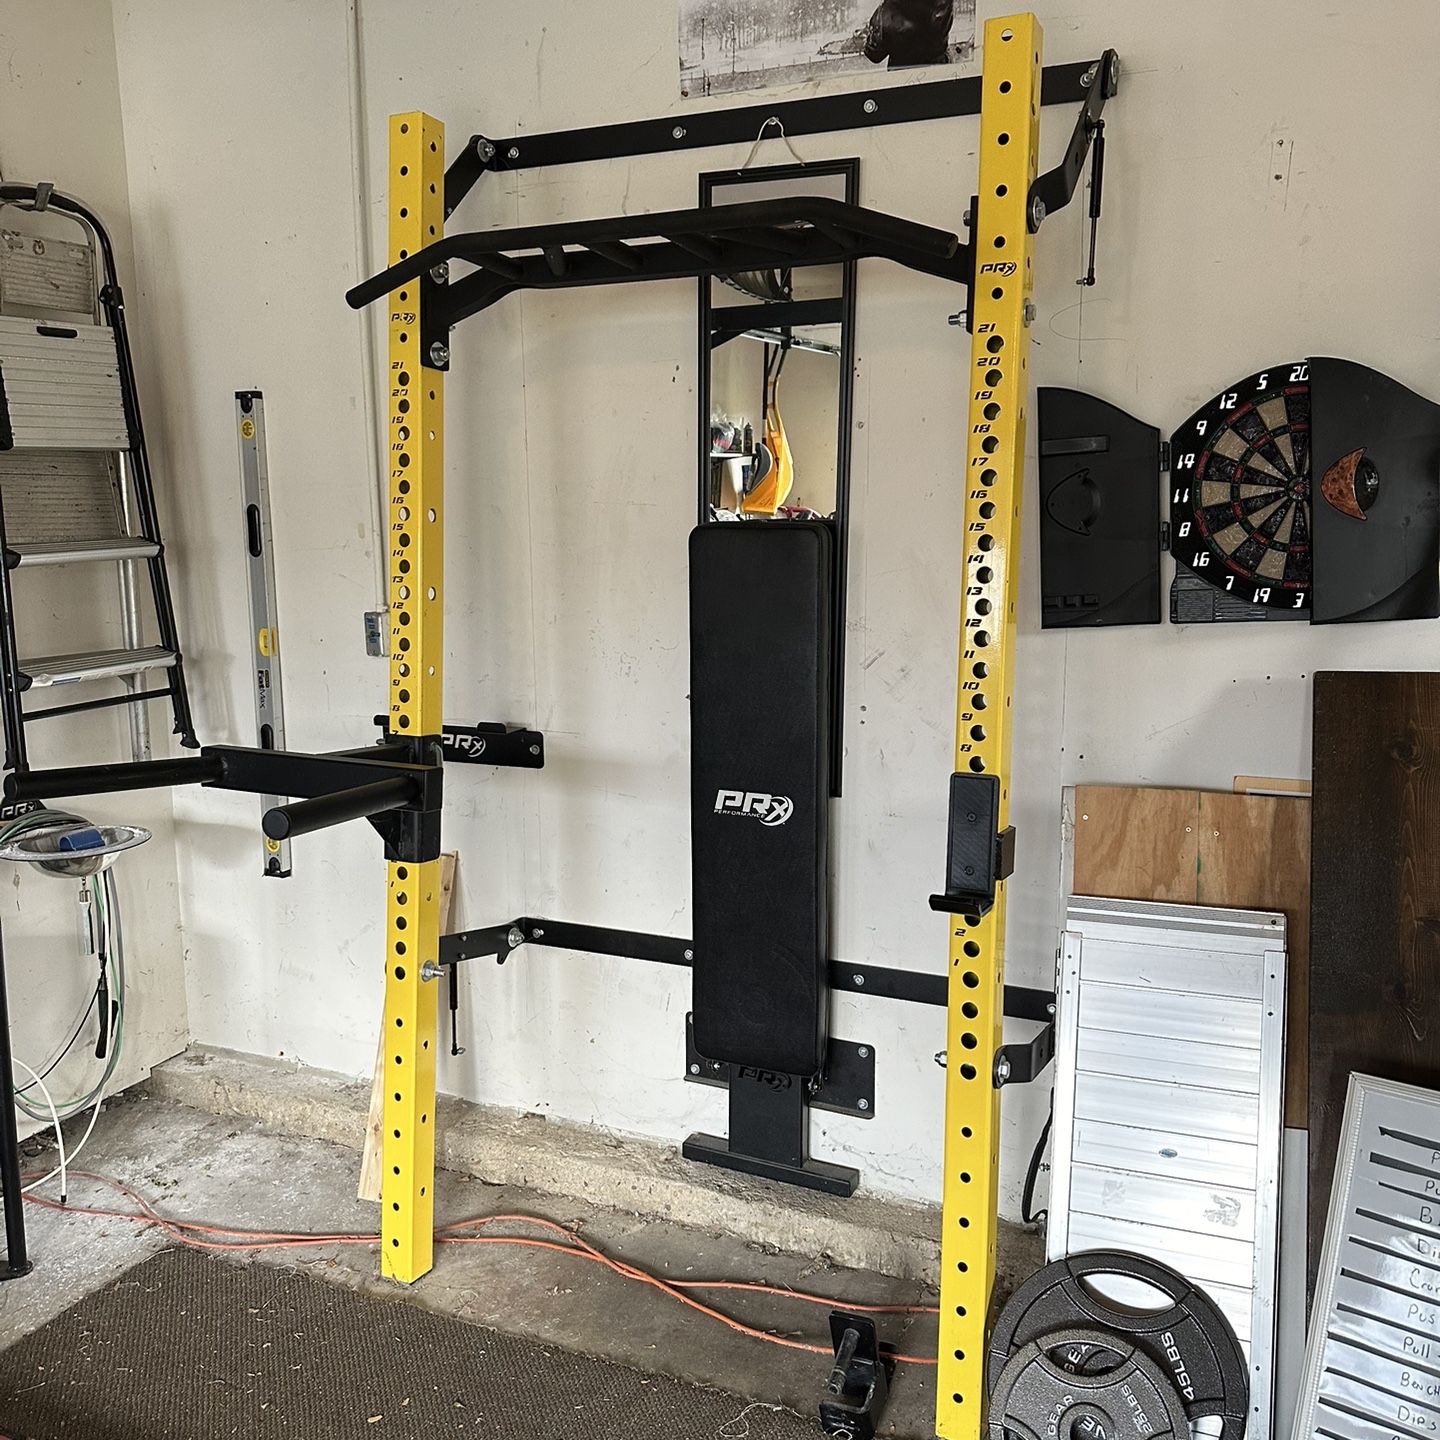 Prx Performance Rack With Accessories 